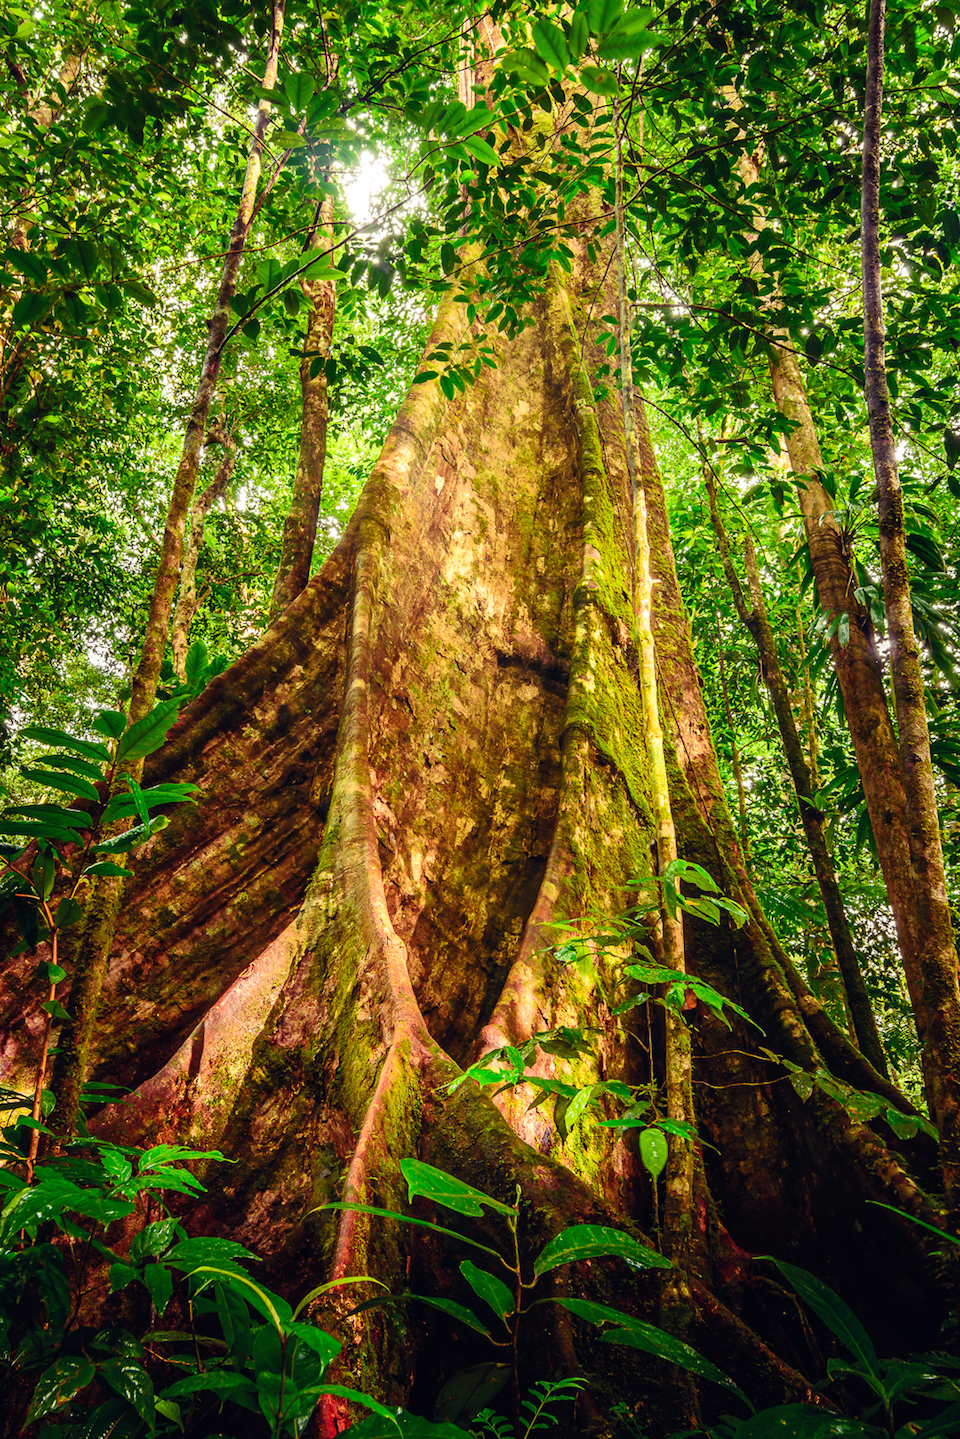 Giants of the Rainforest